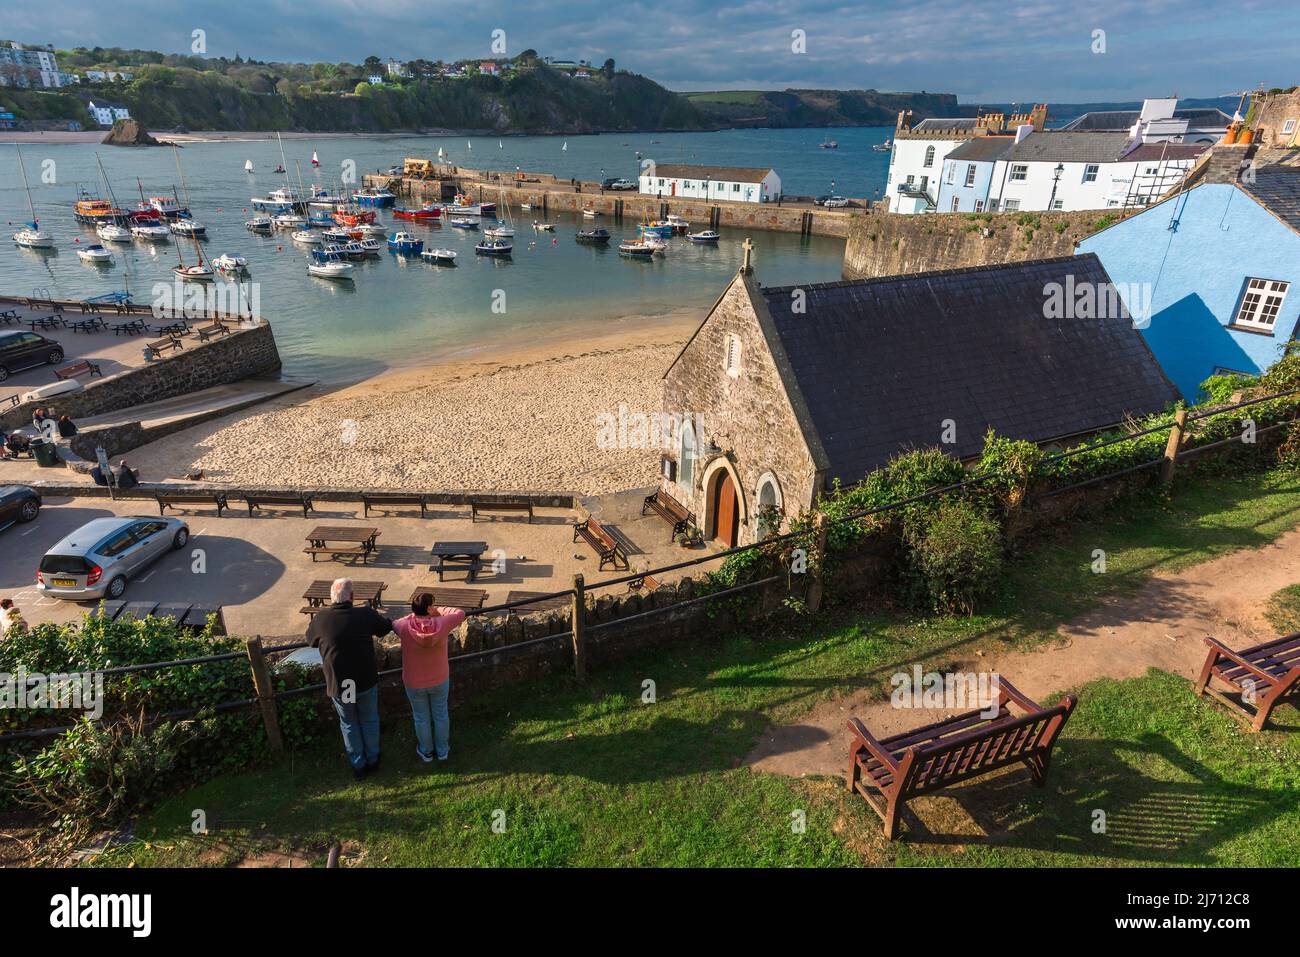 Wales travel, rear view of a mature couple looking down on the small sandy beach in Tenby harbour, Pembrokeshire coast, Wales, UK Stock Photo